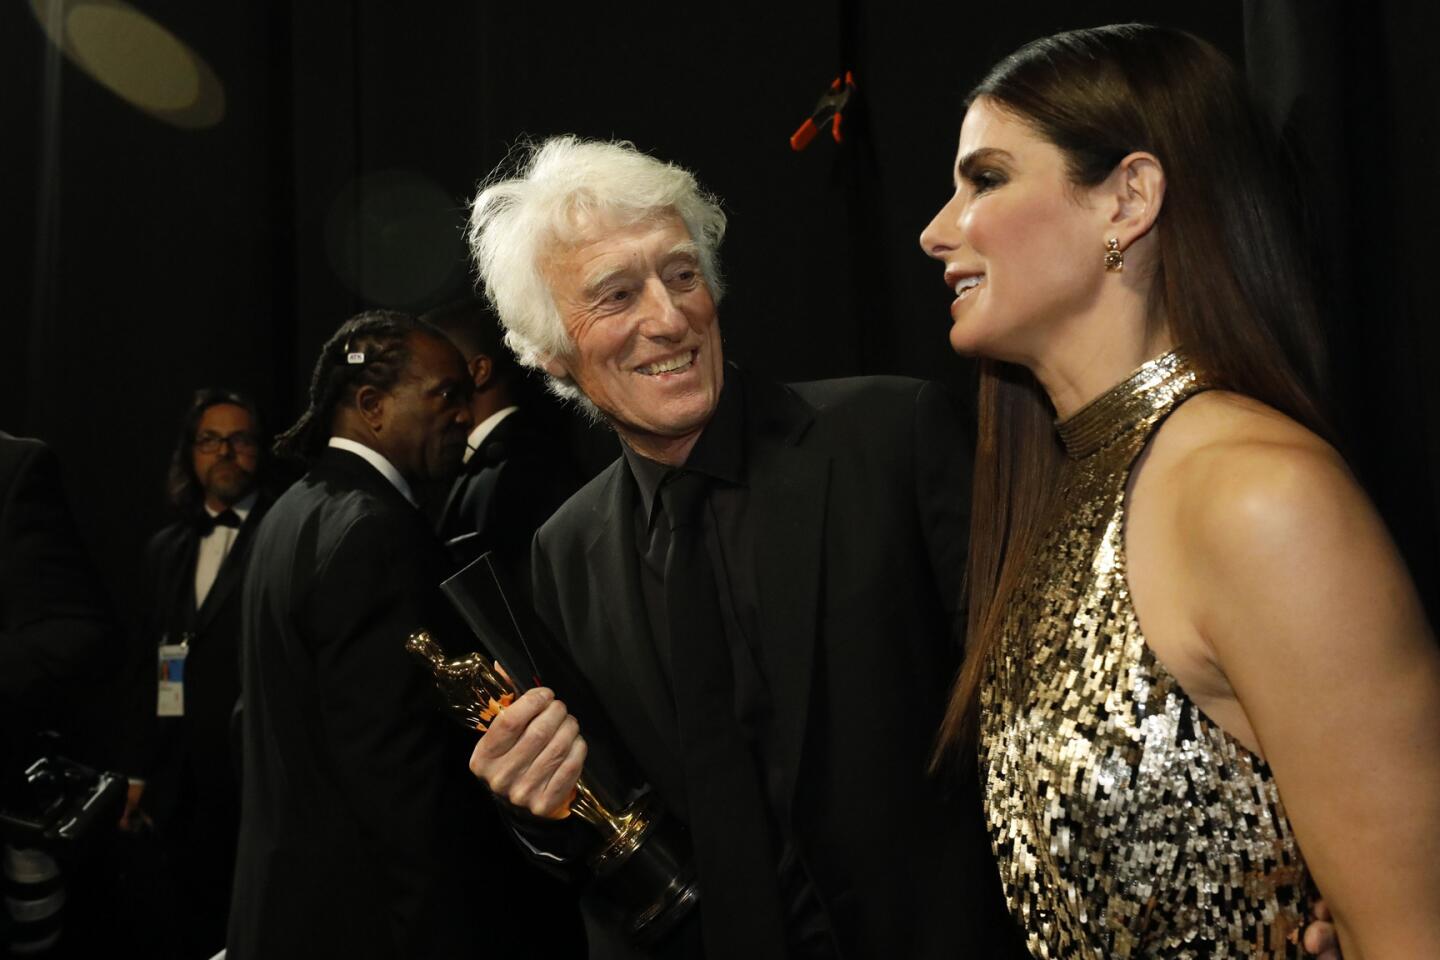 Roger Deakins, after winning for cinematography for "Blade Runner 2049," with presenter Sandra Bullock backstage at the 90th Academy Awards on Sunday at the Dolby Theatre in Hollywood.